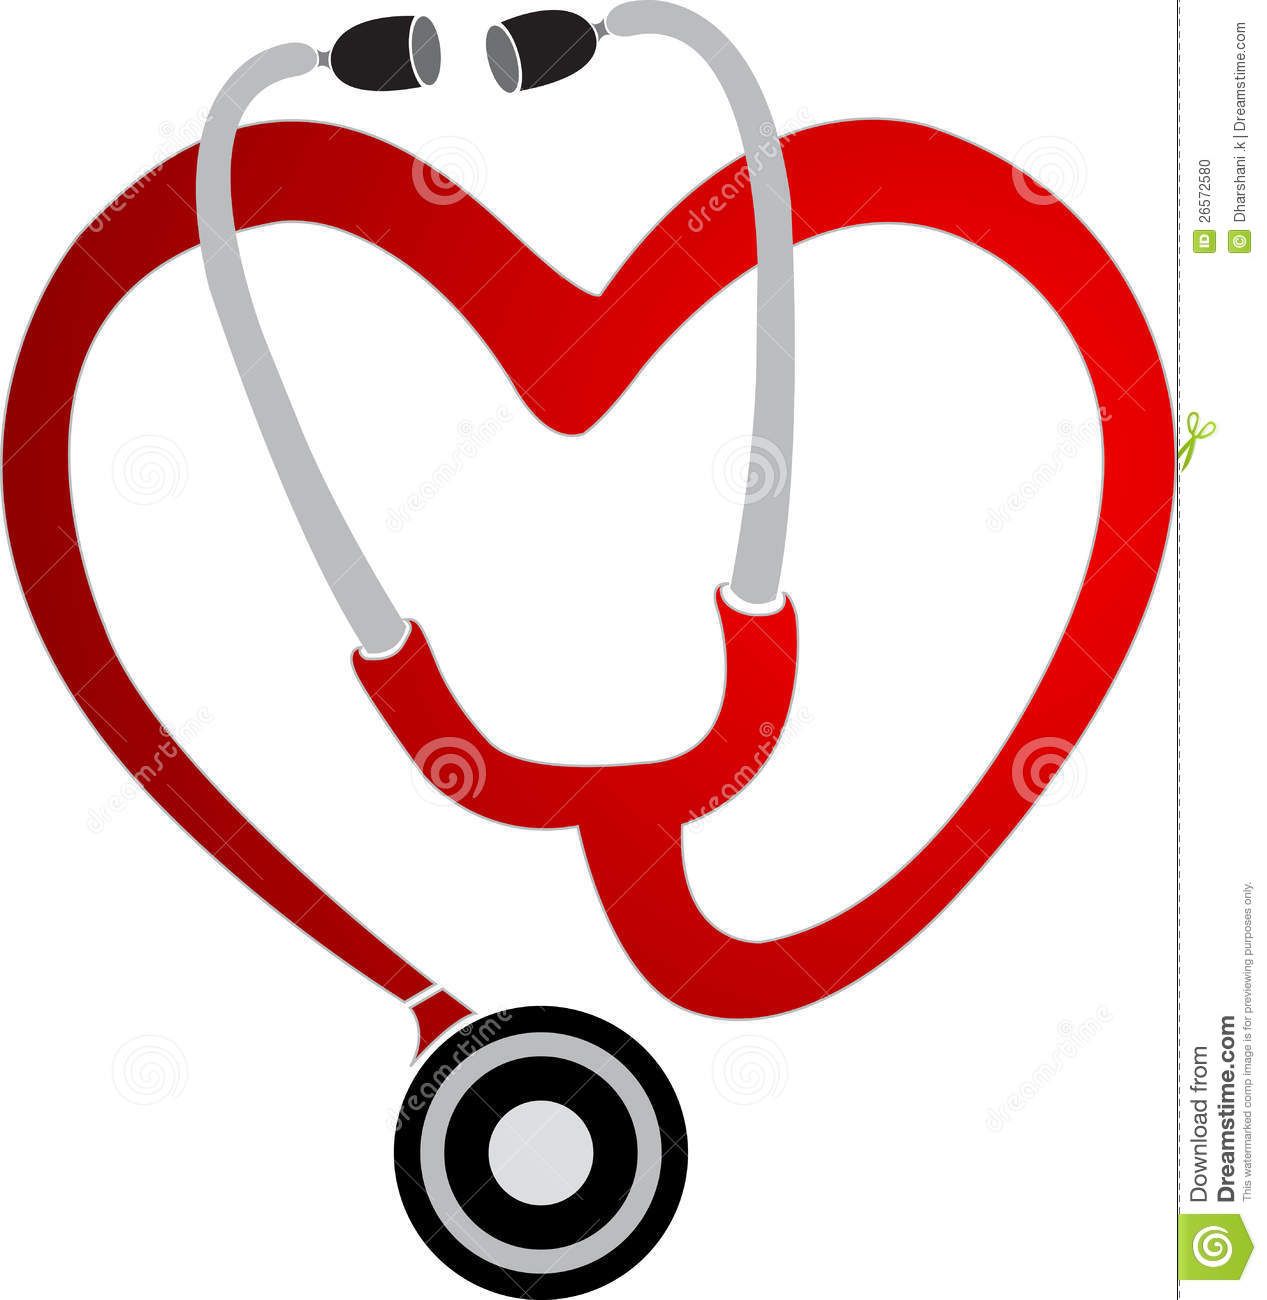 Images for stethoscope.